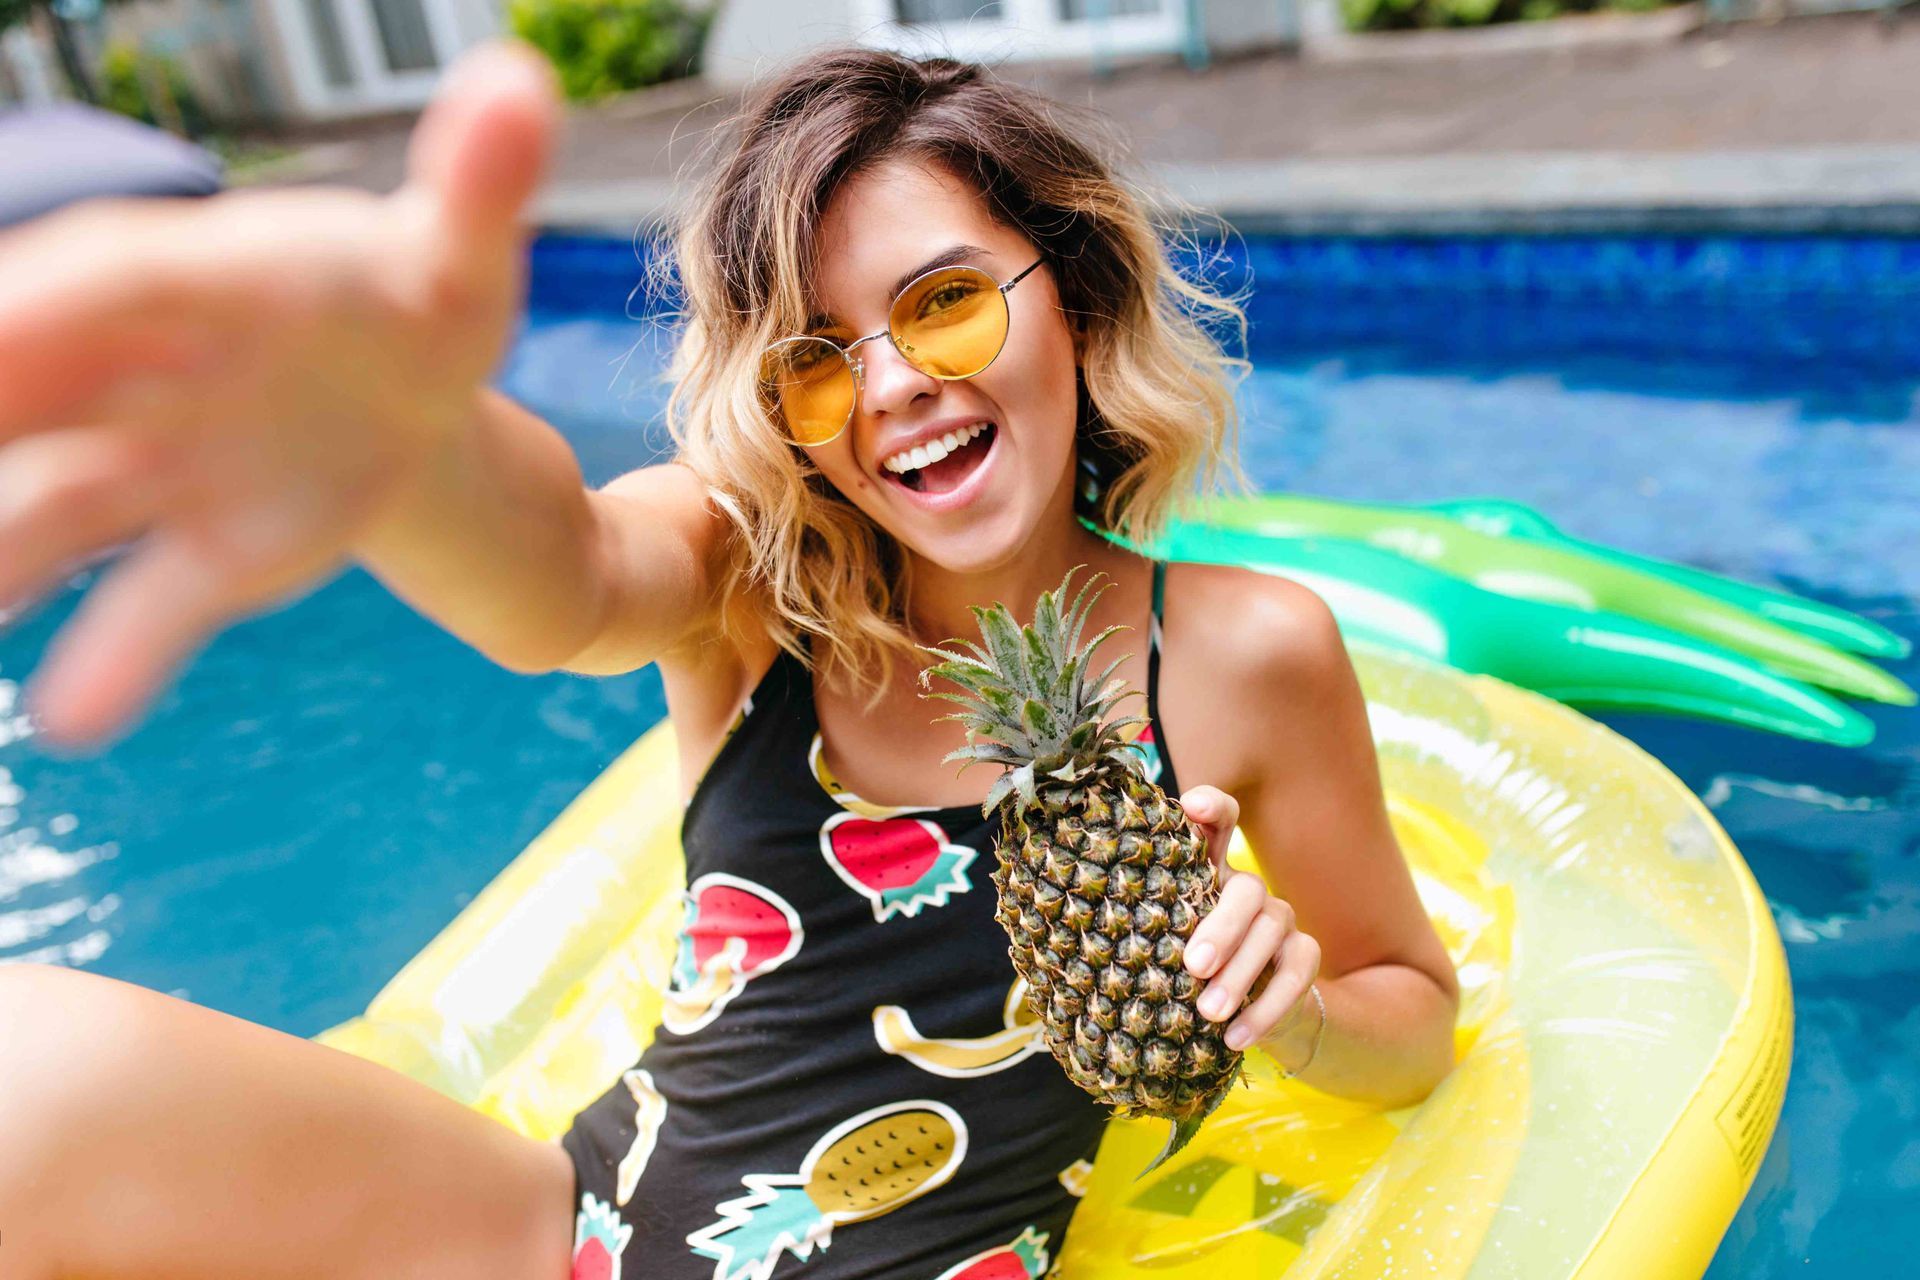 A woman on a raft in a swimming pool with a pineapple in her hand, reaching out toward the camera